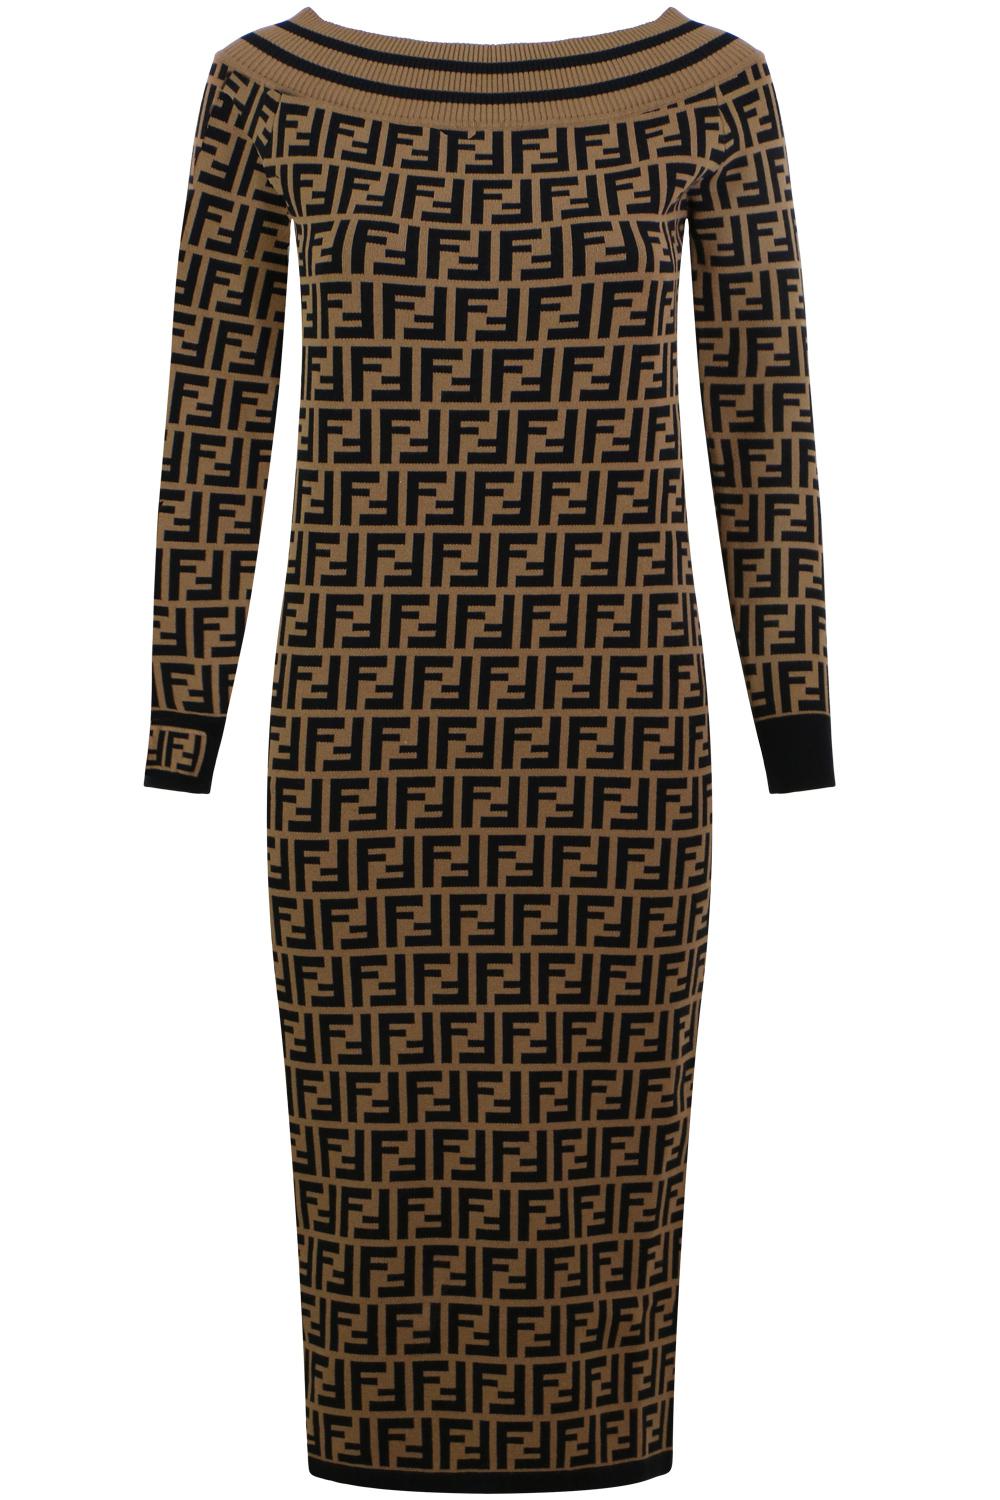 Fendi Synthetic All-over Logo Dress in Tobacco (Brown) - Lyst